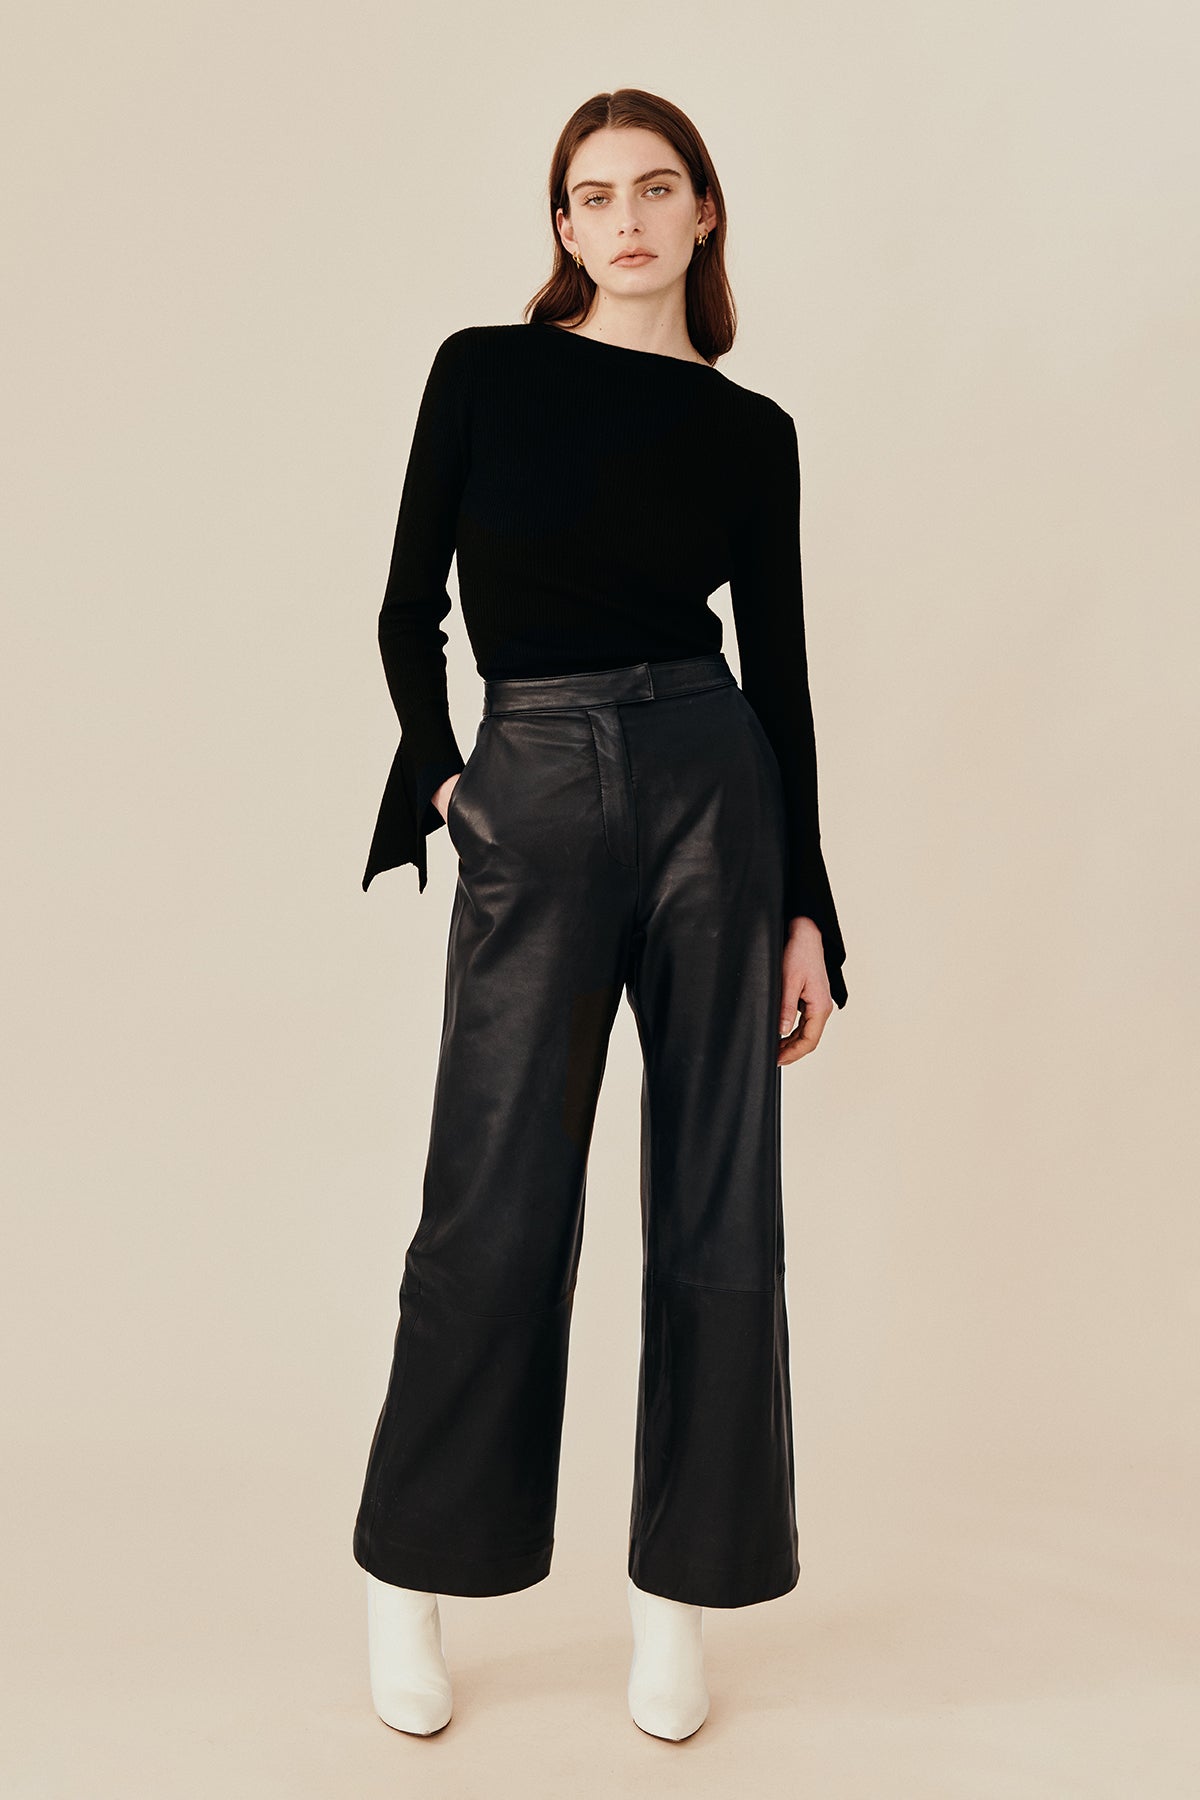 Model wearing Australian fashion designer Ginger & Smarts’ Genesis Leather Pant in a classic straight leg cut in luxe black leather worn with the black wool Dimension Knit Top.